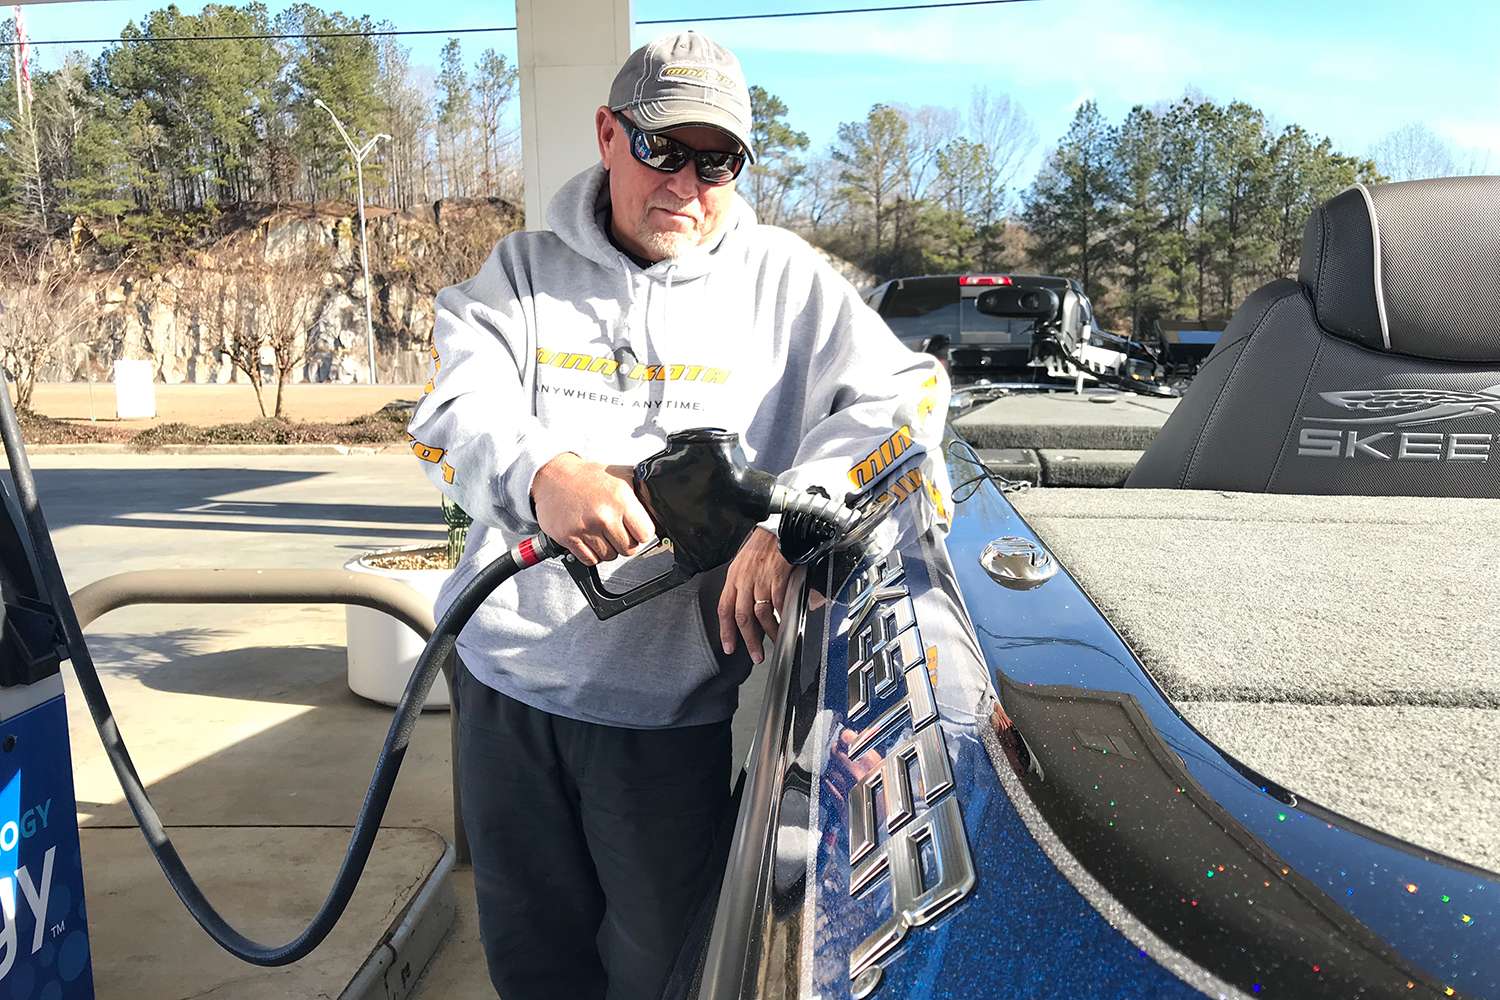 Bassmaster Elite Series pro and lifetime Alabama resident Matt Herren met up with photographer/writer Thomas Allen before Lake Martin went off limits to give him an inside look at the lake that serves as the opening tournament for the 2018 Elite Series season.